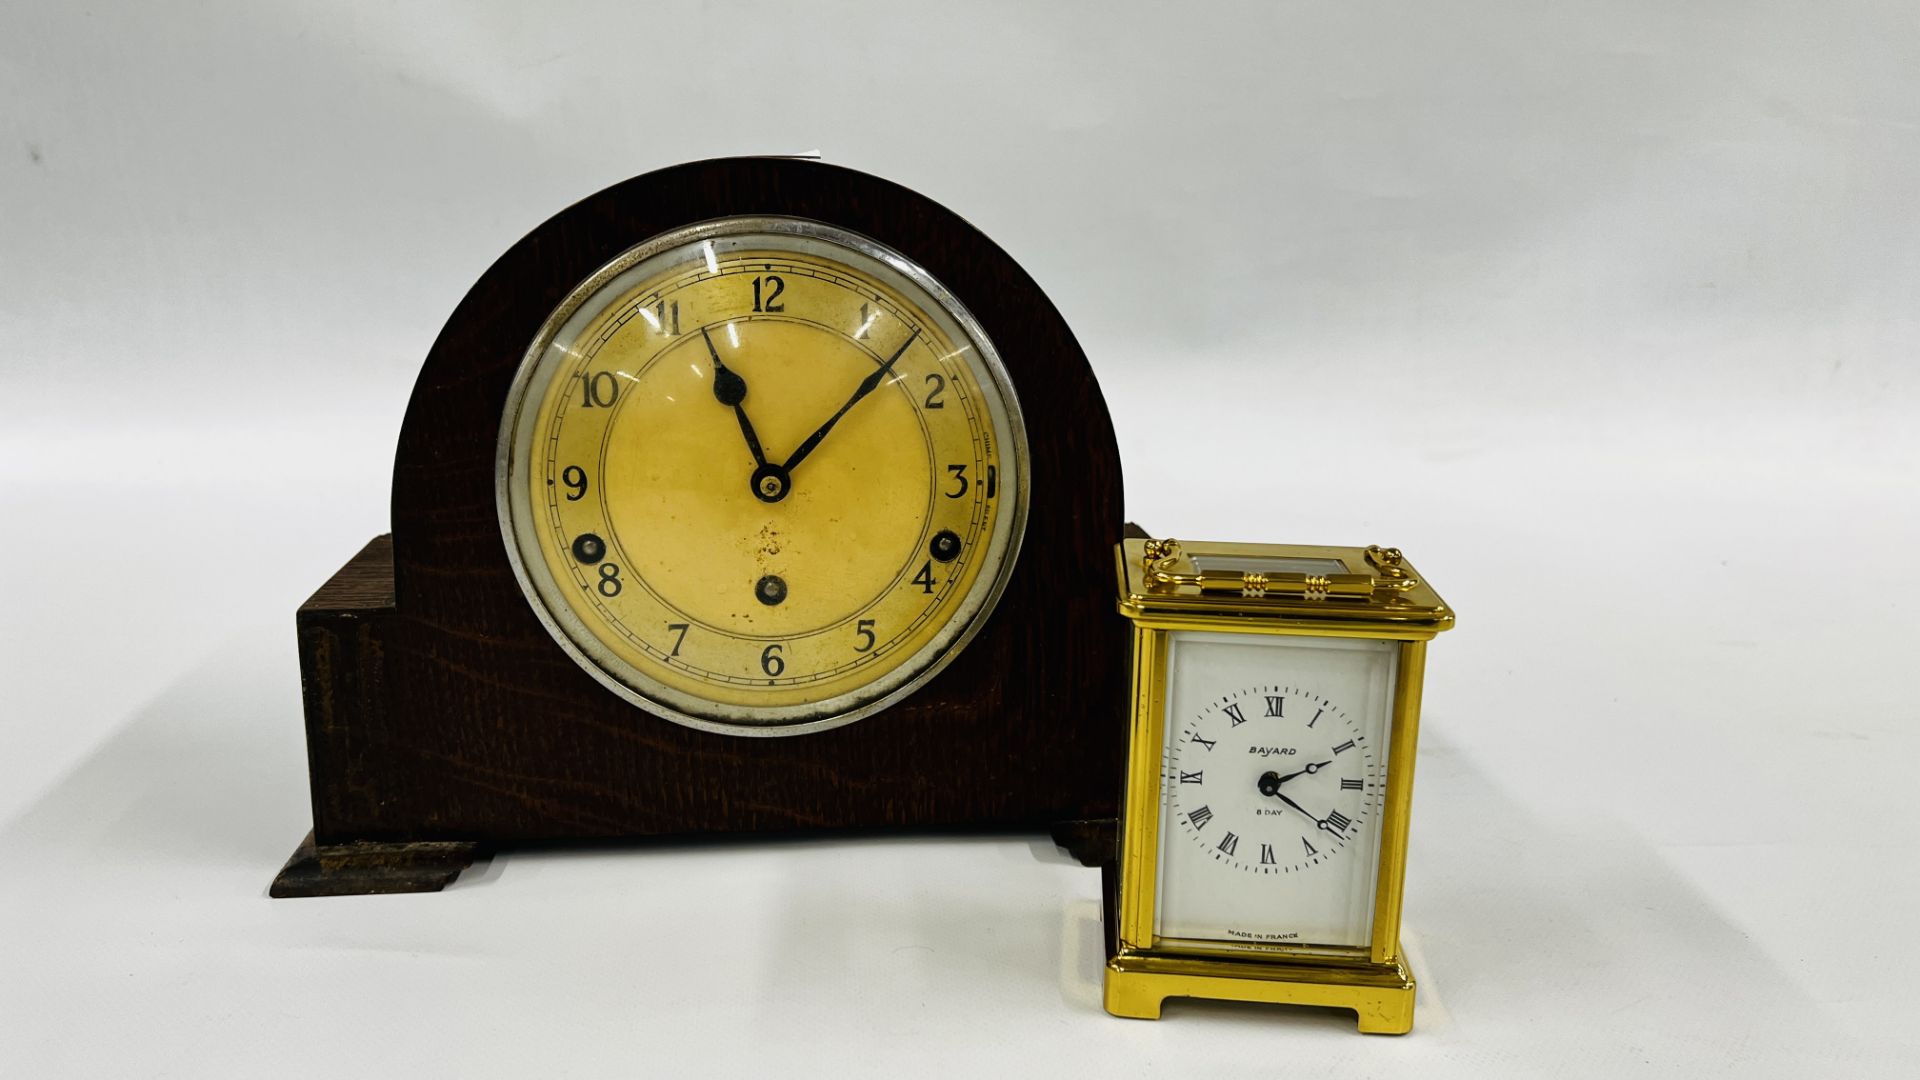 A GARROD 8 DAY MANTEL CLOCK ALONG WITH AN 8 DAY CARRIAGE CLOCK.